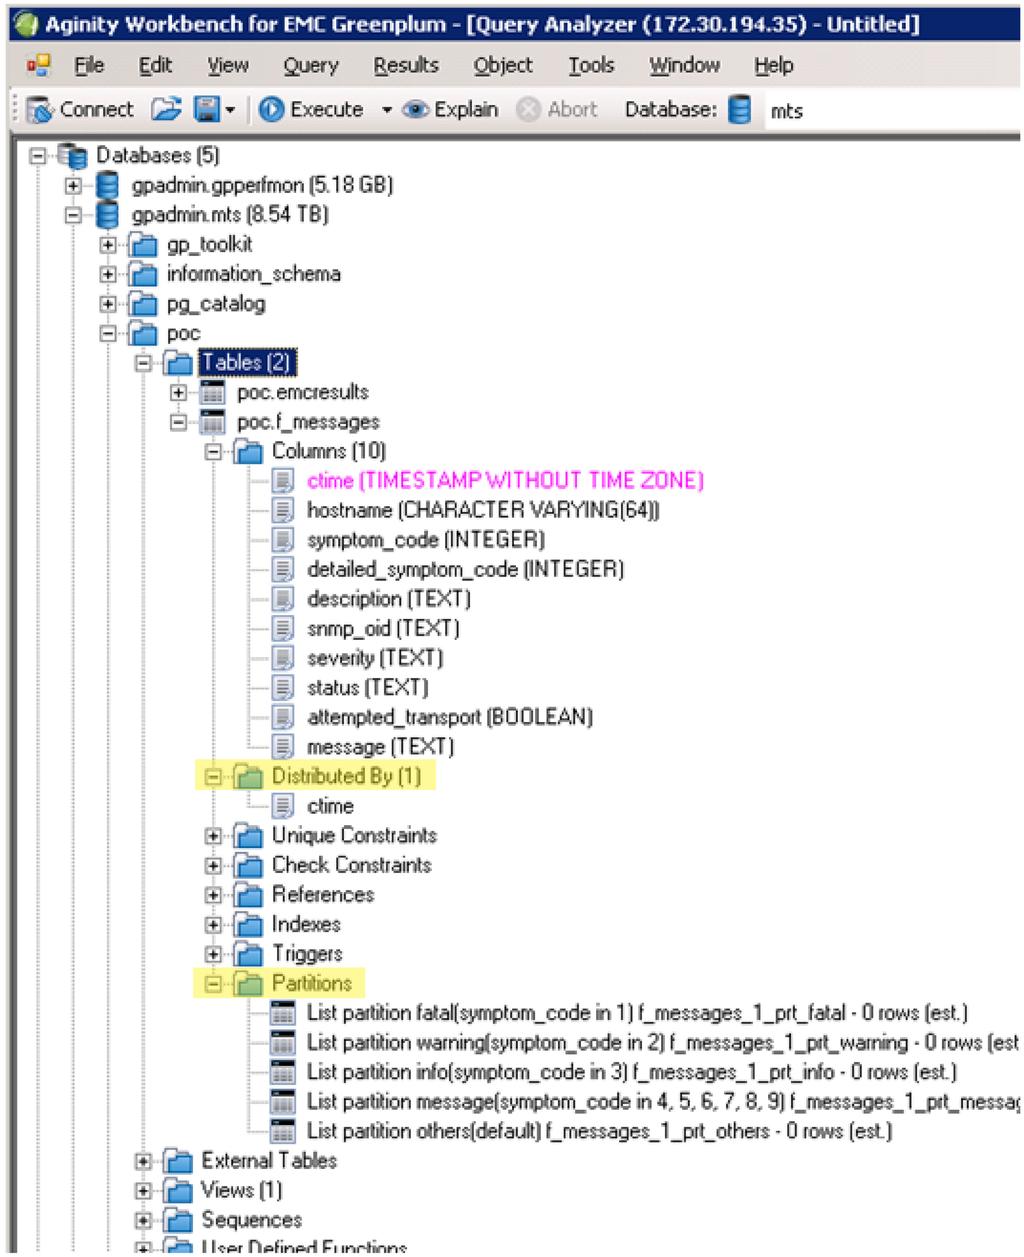 Figure 3 shows a database expanded to display database objects. The view displays Greenplum-specific objects and information such as Partitions and the Distributed By clause in a table definition.